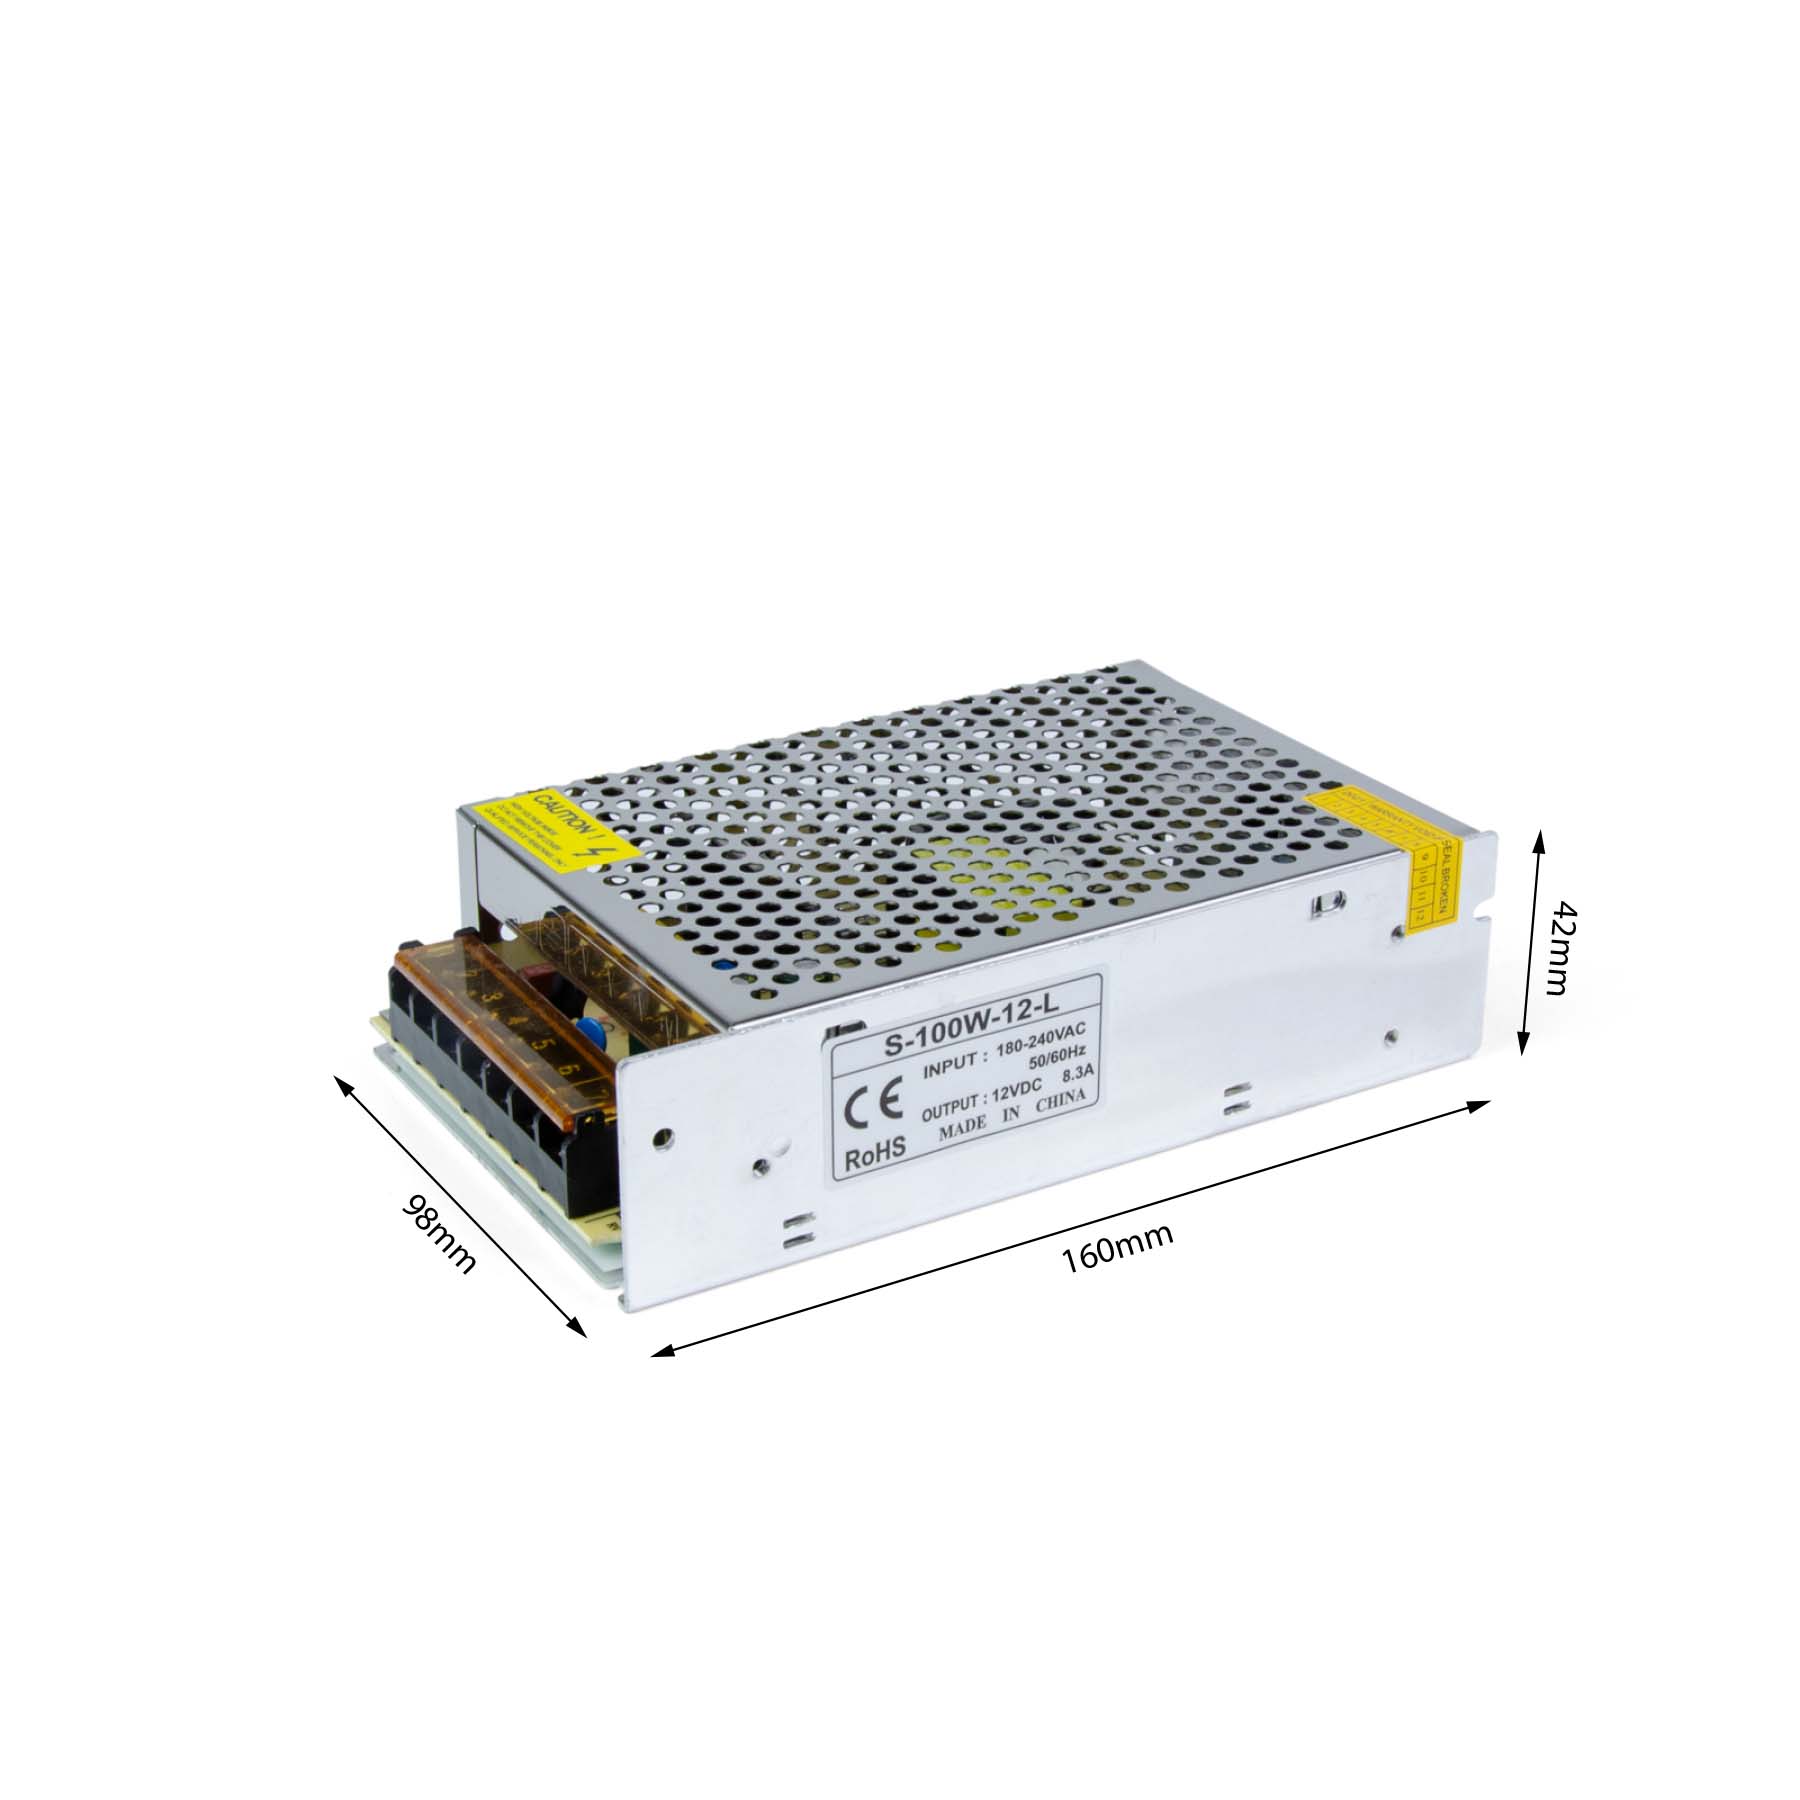 G.W.S. LED LED Drivers/LED Power Supplies IP20 (Non-Waterproof) / 12V / 100W 12V 8.3A 100W LED Driver